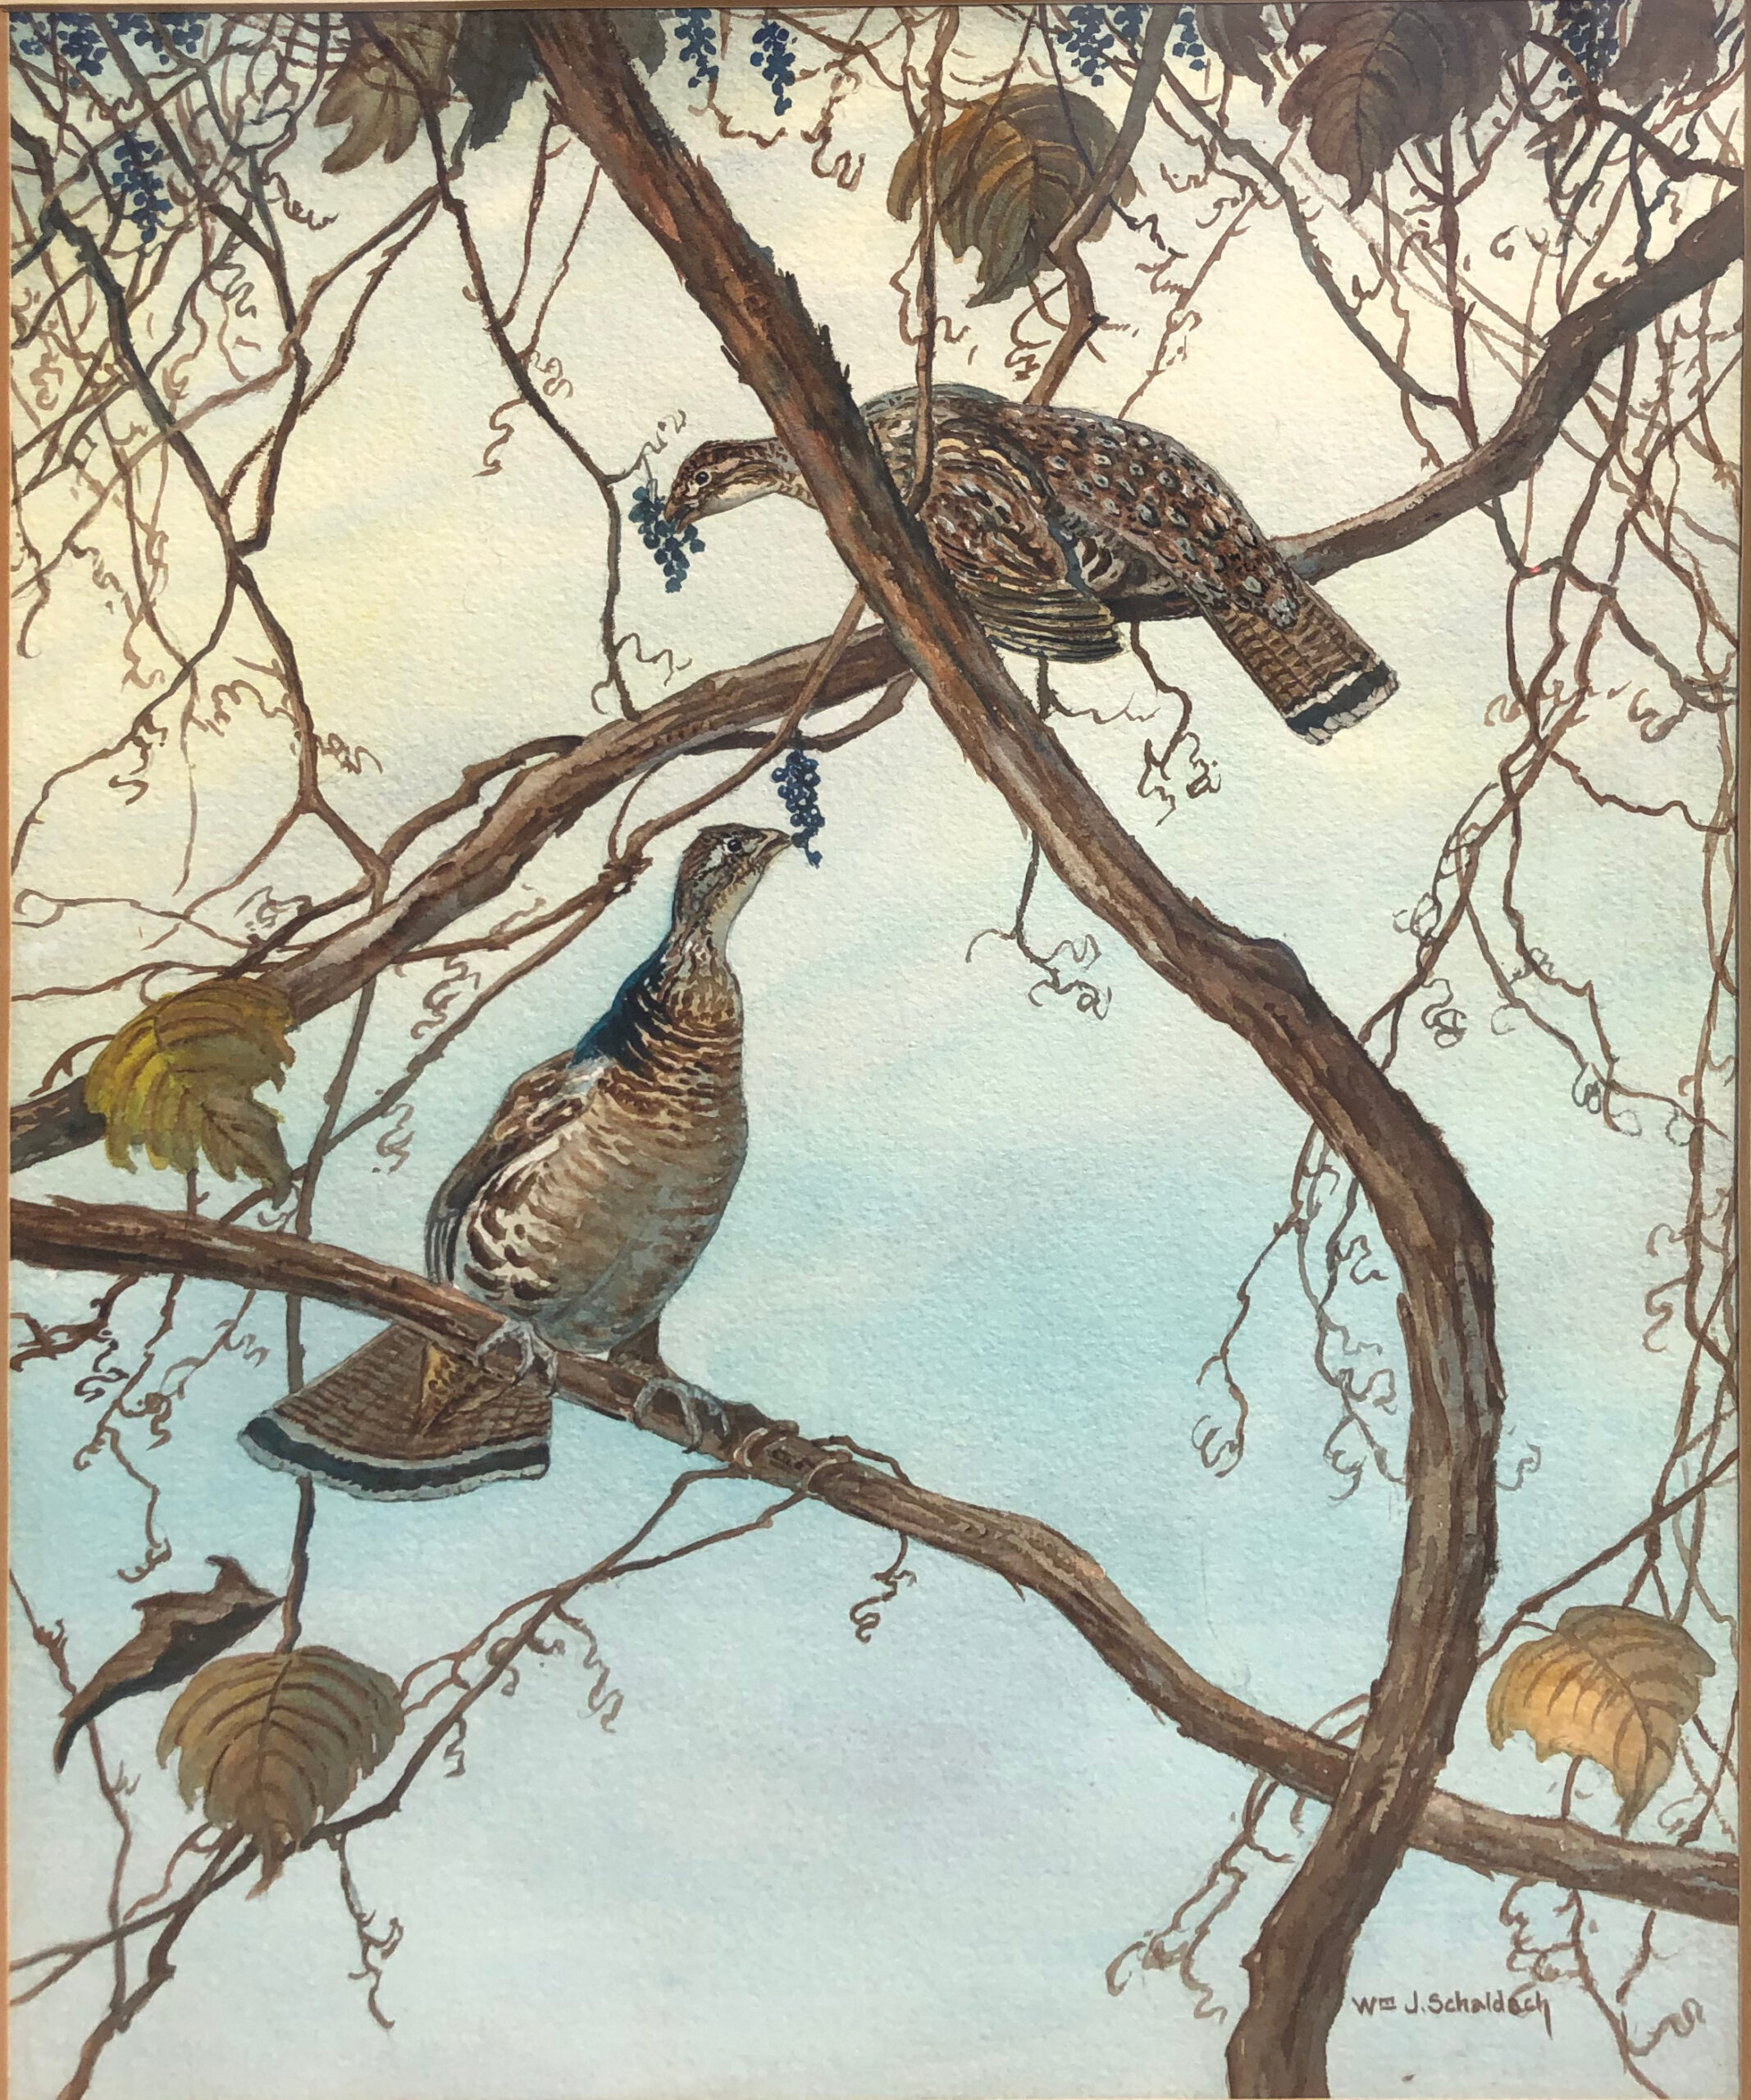 William Schaldach - Grouse in Grapes, Watercolor, 18 x 13 inches